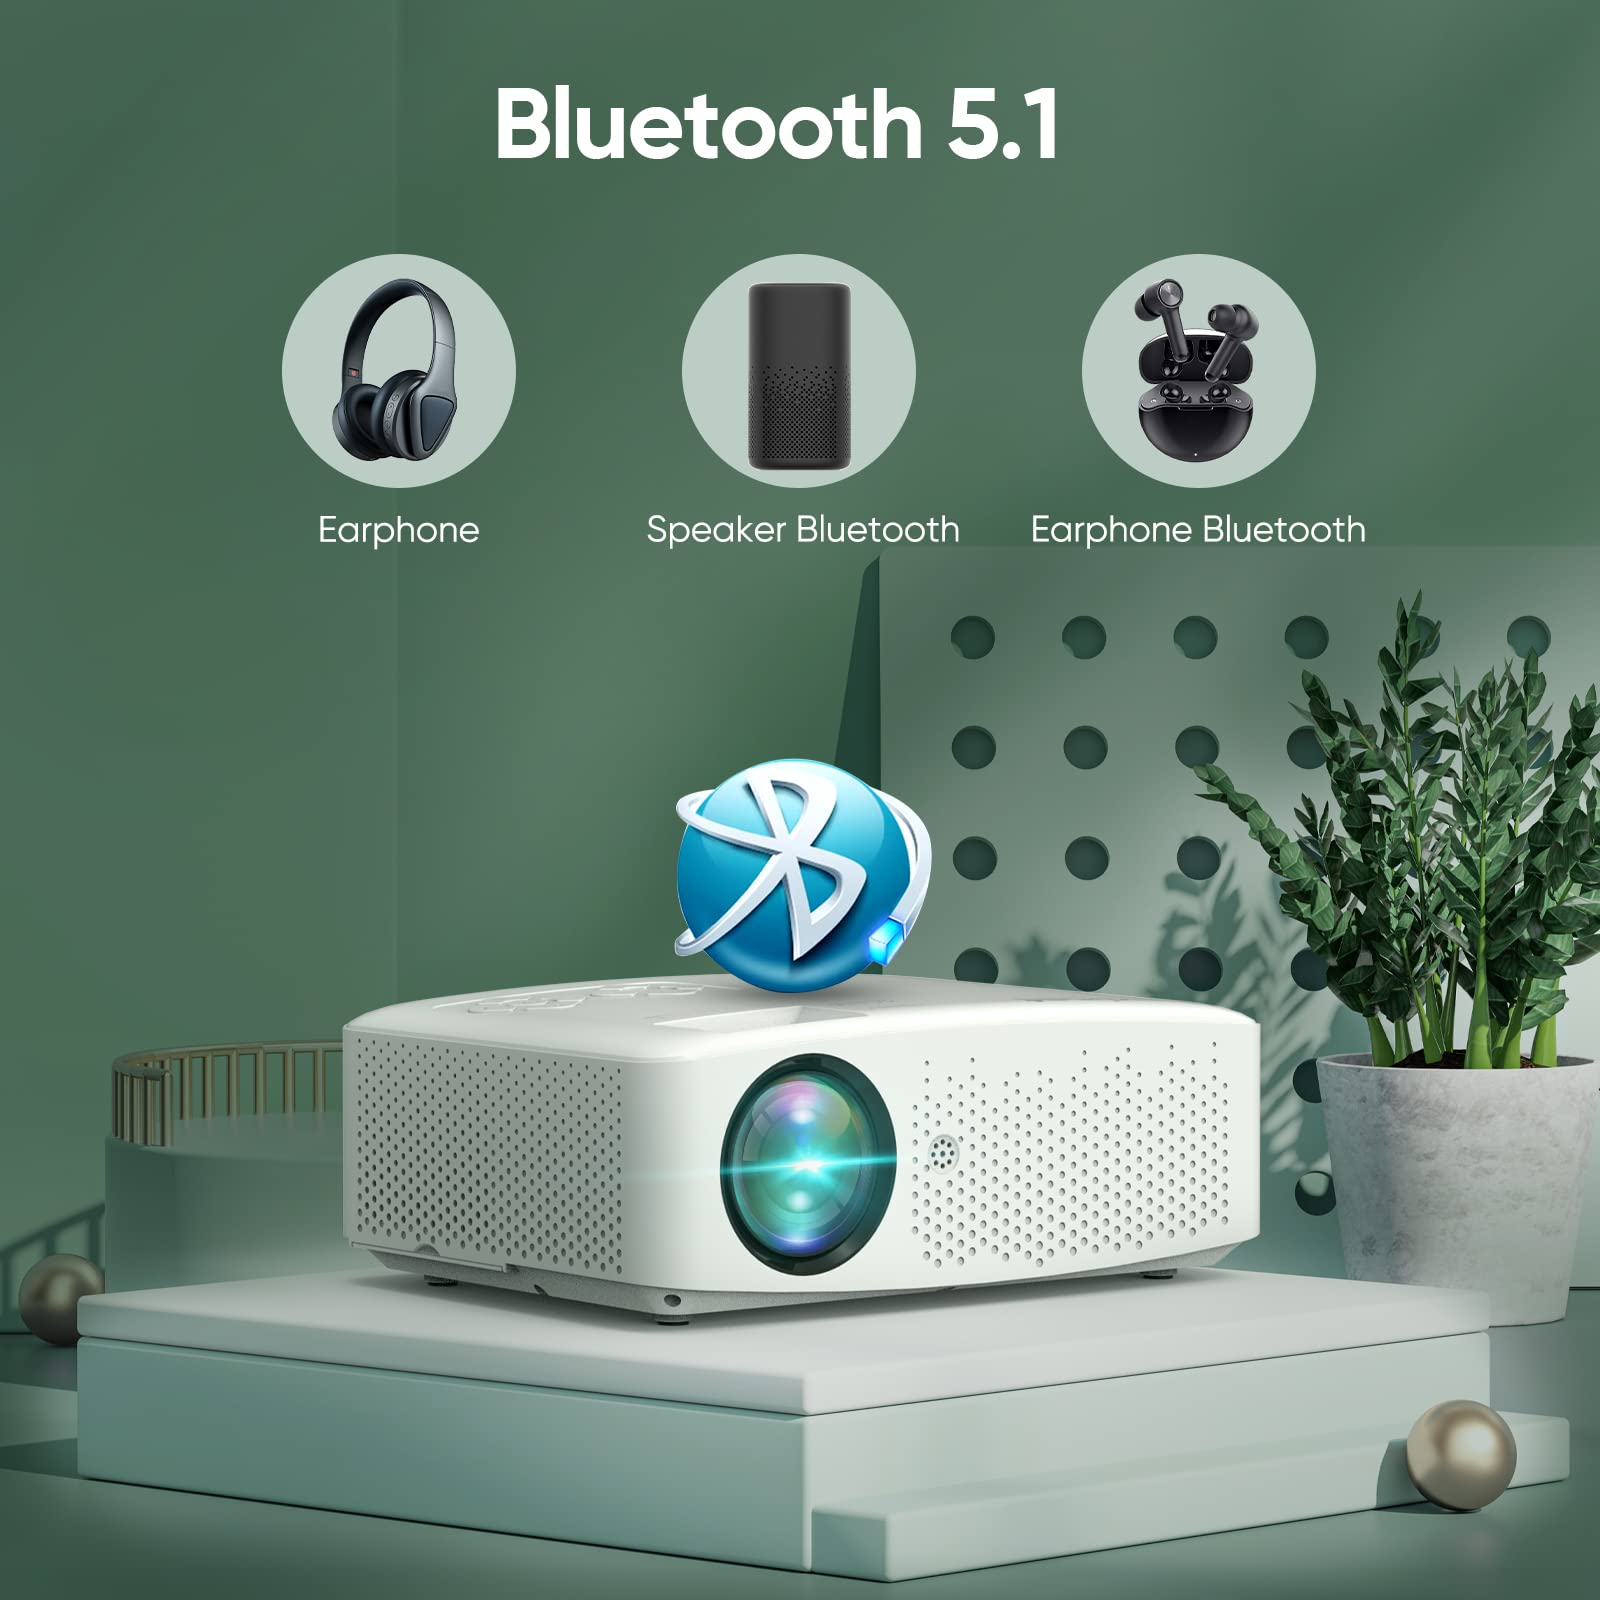 Native 1080P 19000 Lumens 5G WiFi Bluetooth Projector, 600ANSI Outdoor Movie Proyector Supports 4K, 5G/2.4G WiFi and Bluetooth 5.1, Compatible with HDMI, VGA, USB, Laptop, iOS & Android Phone